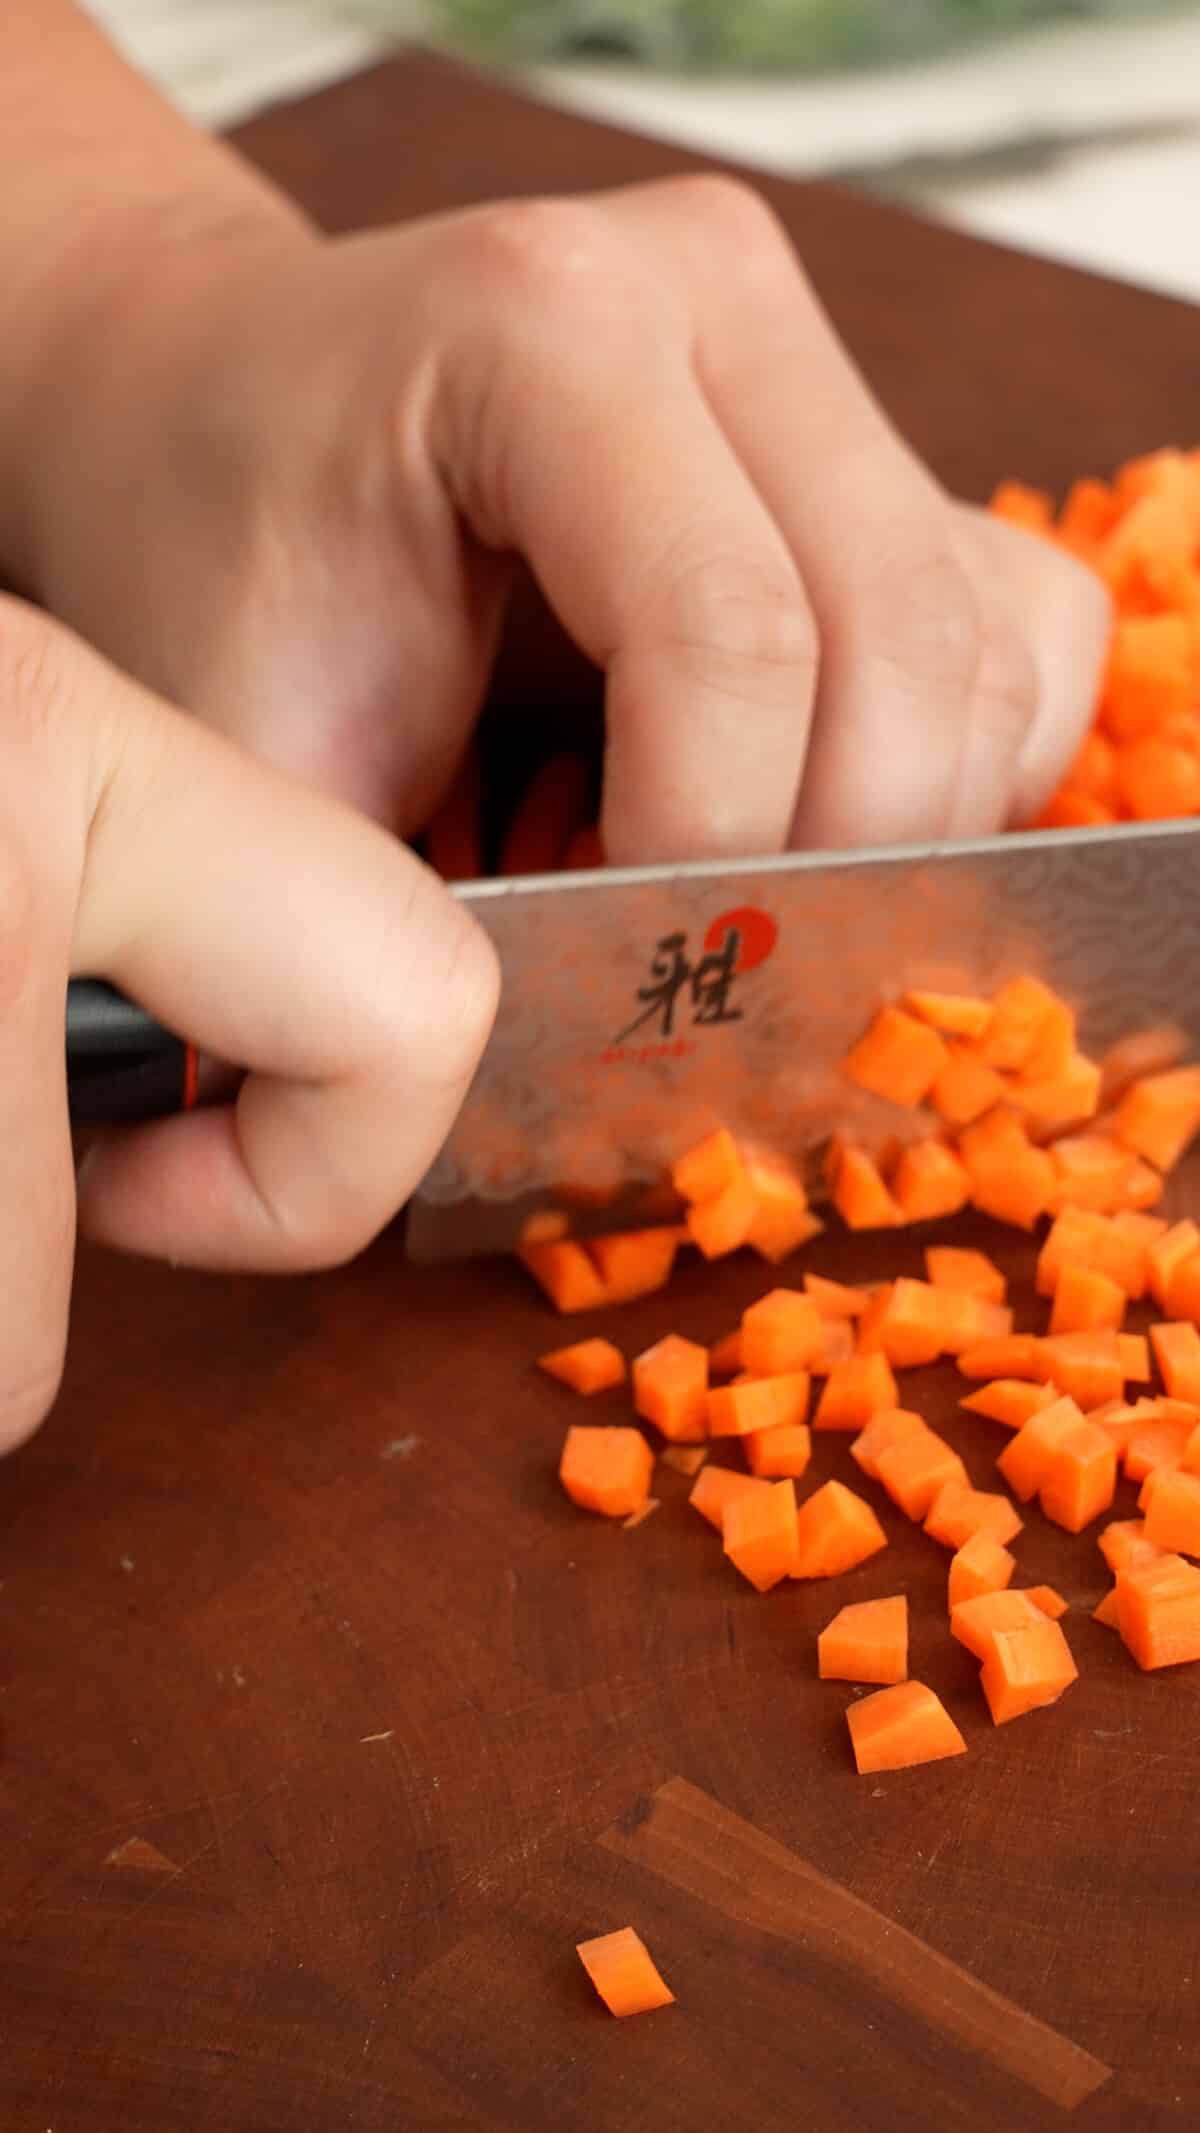 Cutting carrots on a cutting board with a knife.